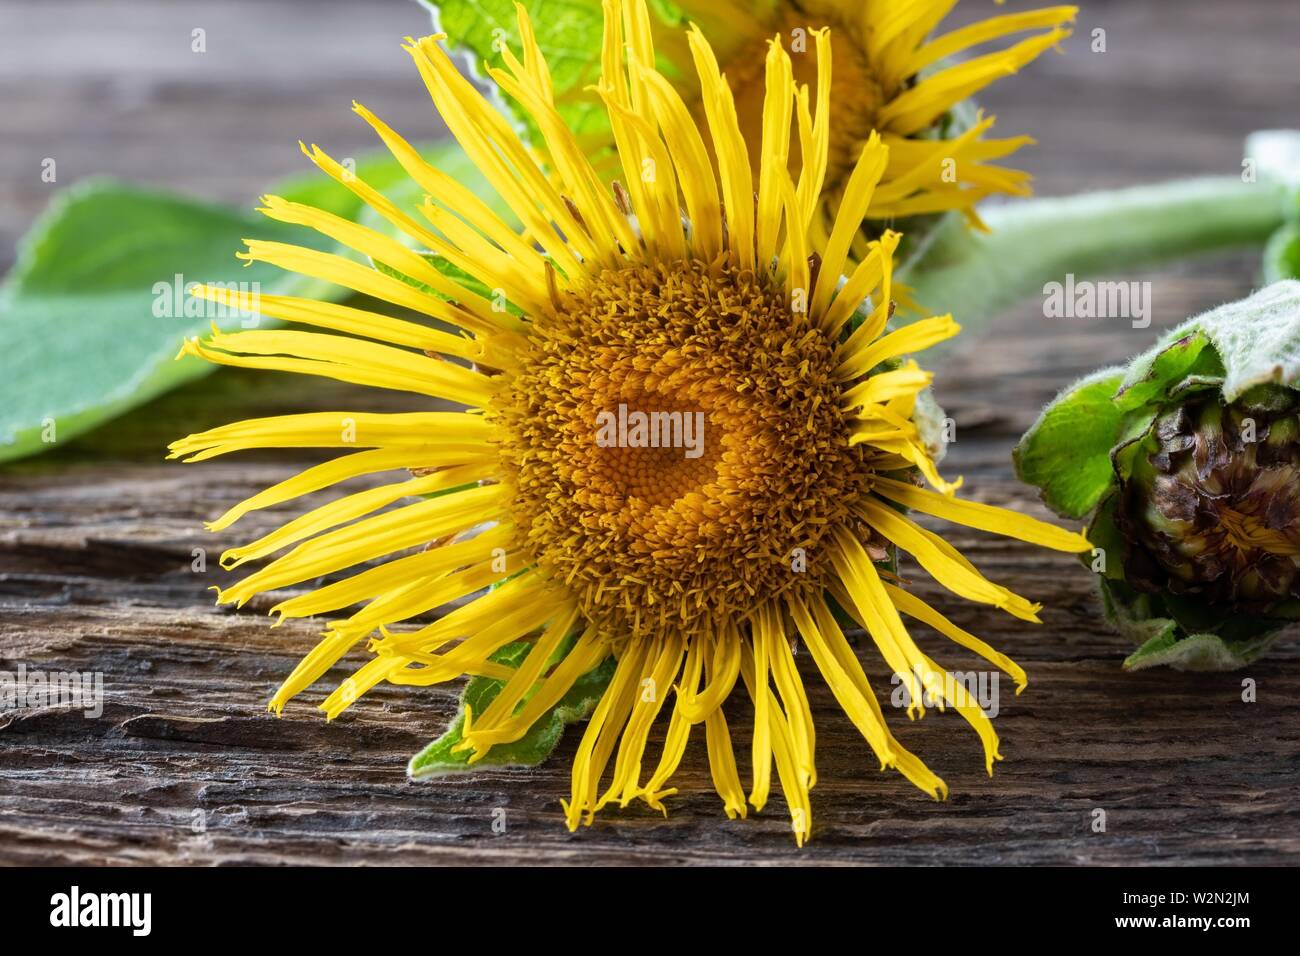 Fresh blooming elecampane, or Inula helenium plant on a table. Stock Photo